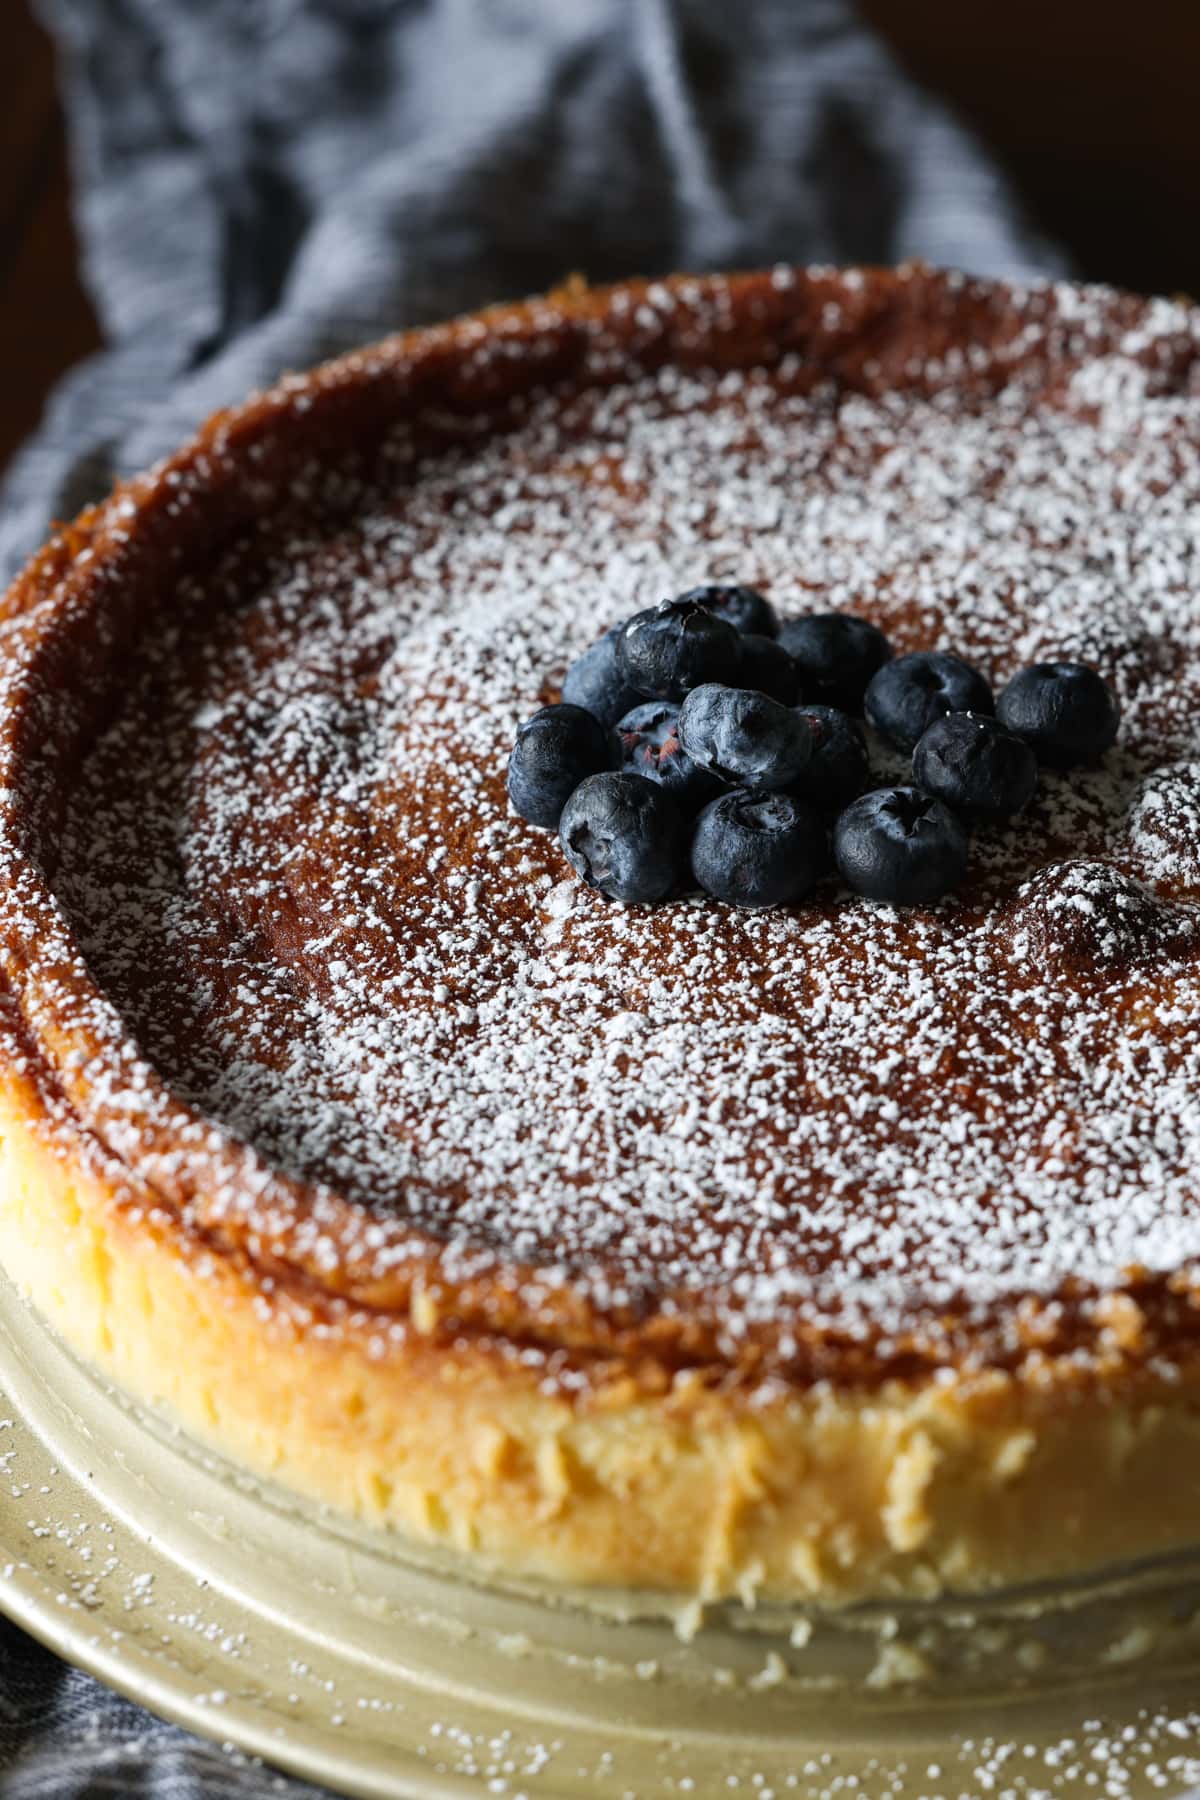 Flourless white chocolate cake dusted with powdered sugar and garnished with fresh blueberries.